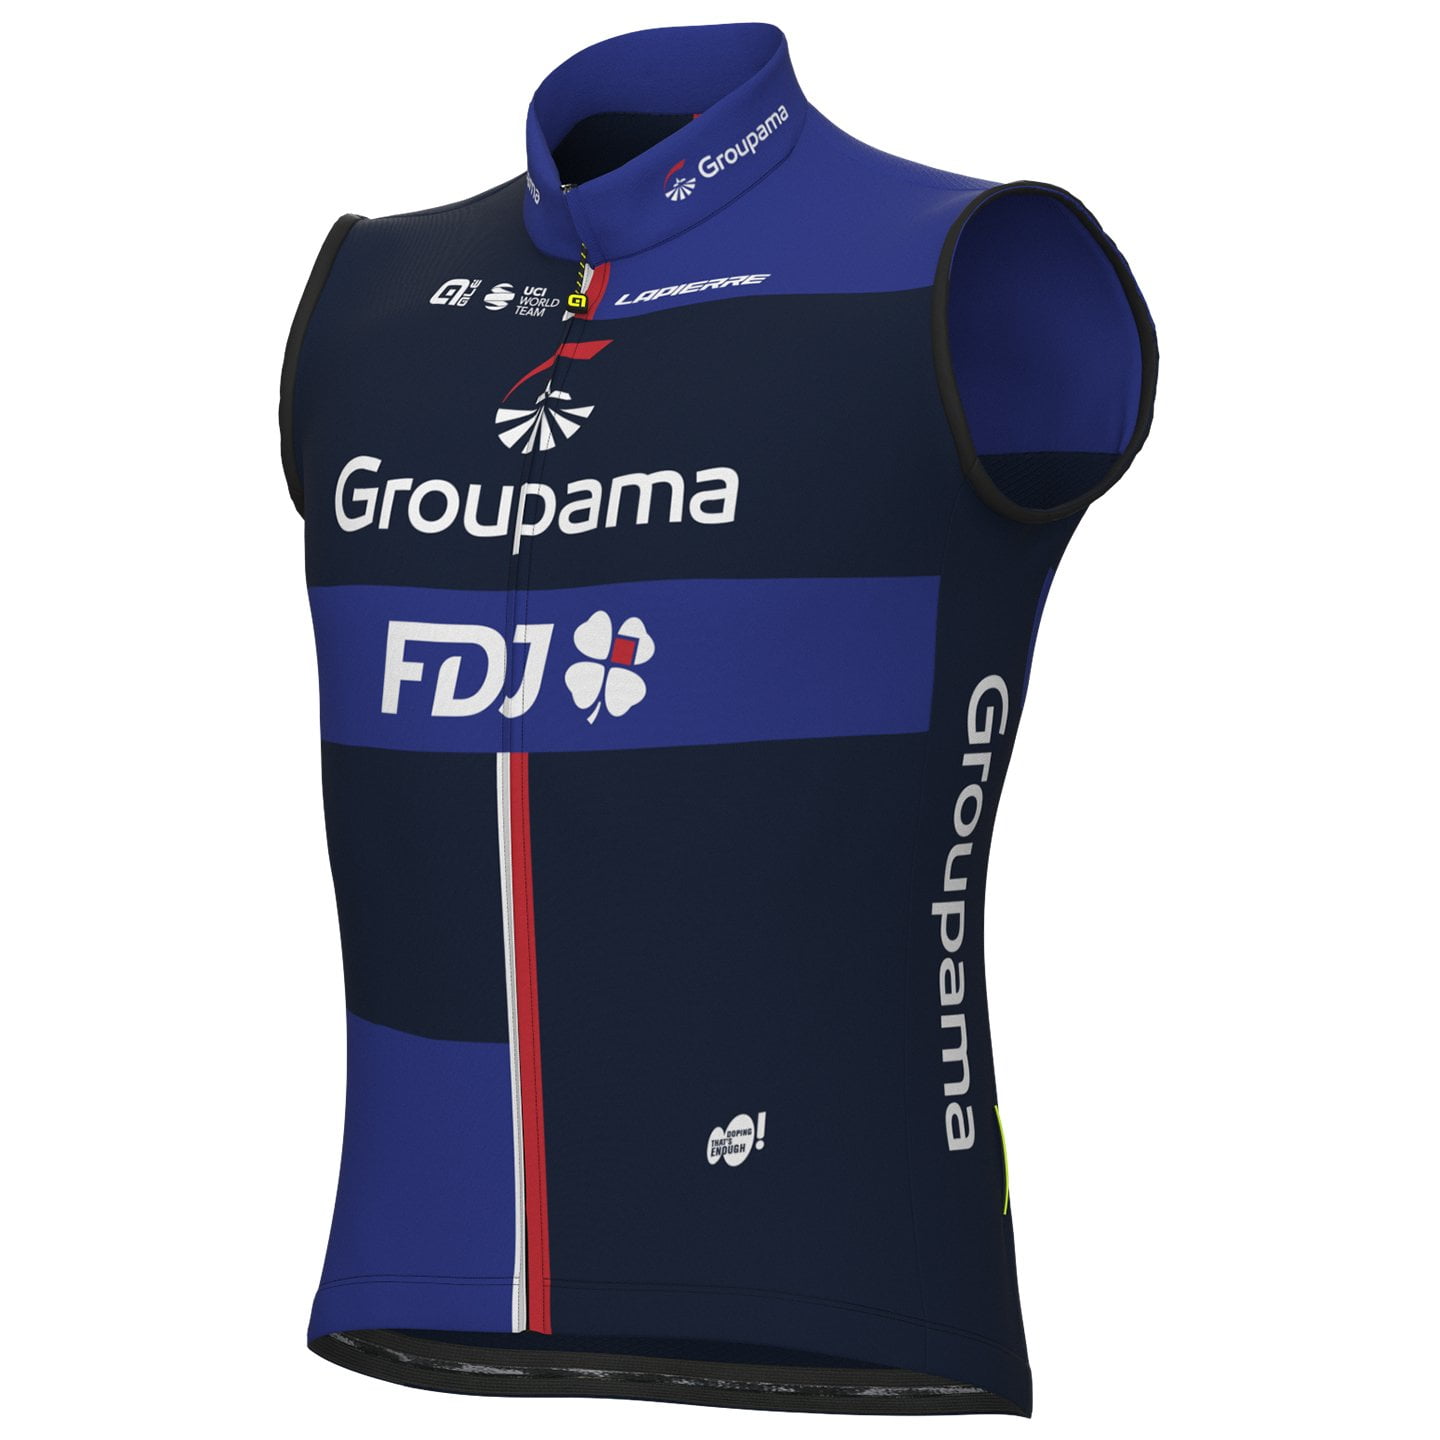 GROUPAMA - FDJ 2023 Wind Vest, for men, size S, Cycling vest, Cycling clothing